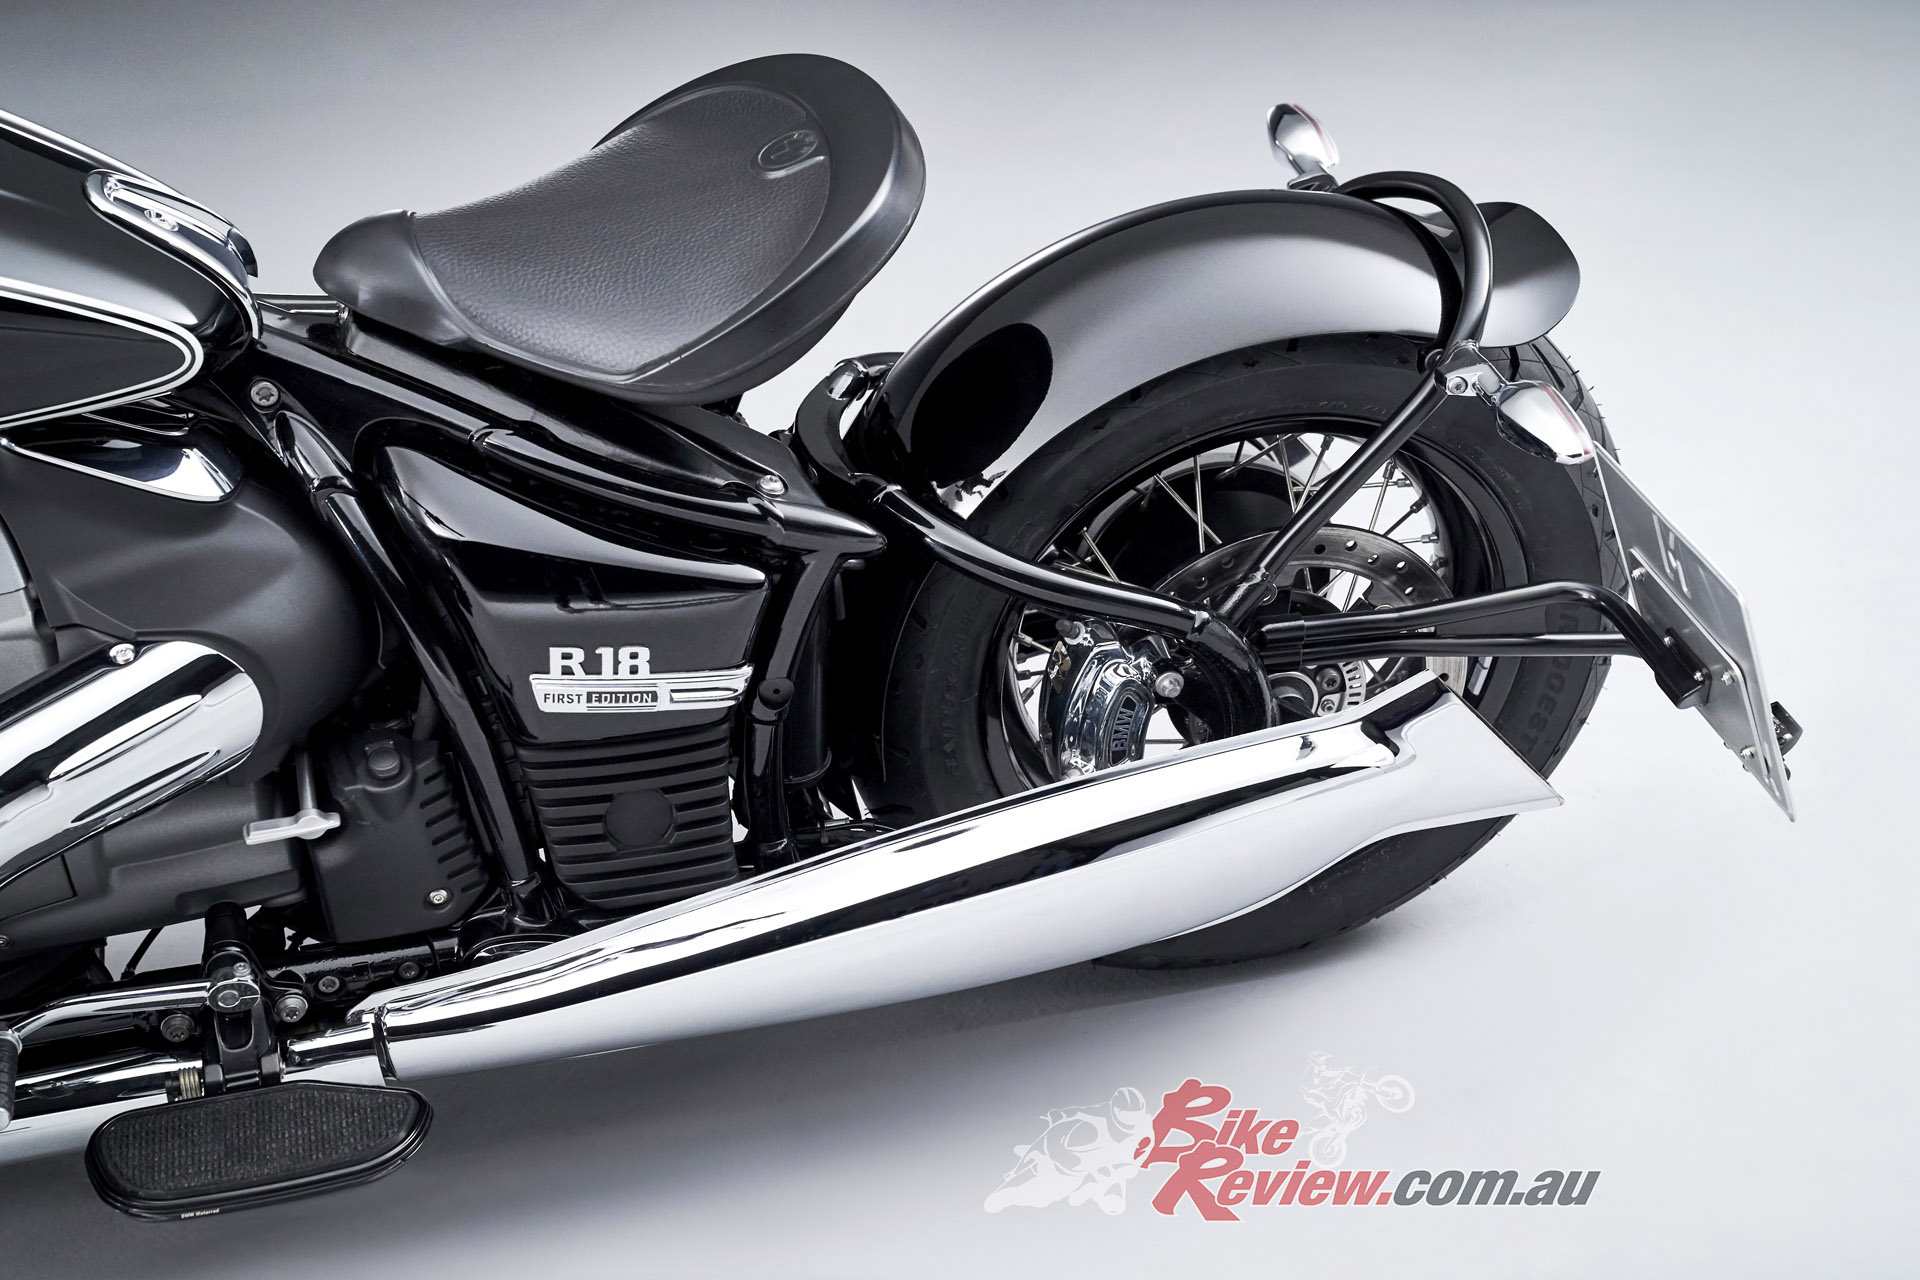 New Model Bmw R 18 First Edition Cruiser Full Details Bike Review